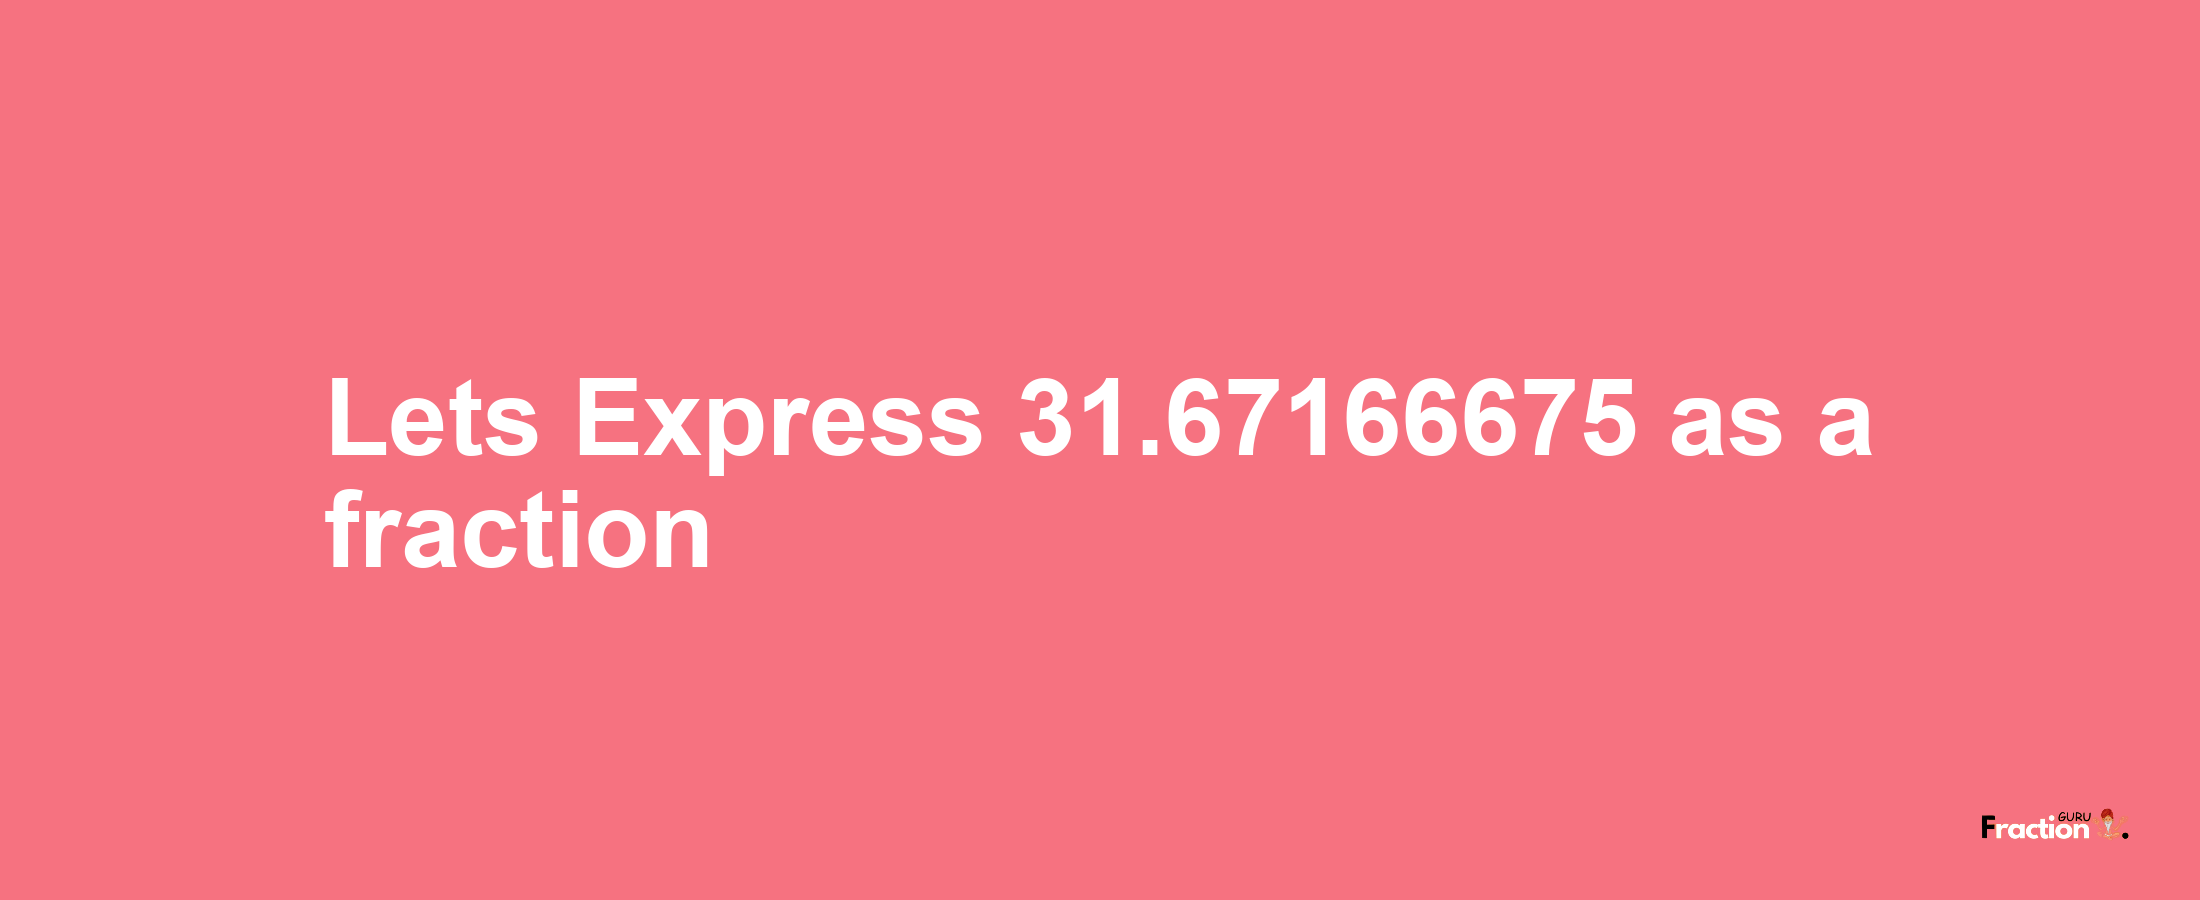 Lets Express 31.67166675 as afraction